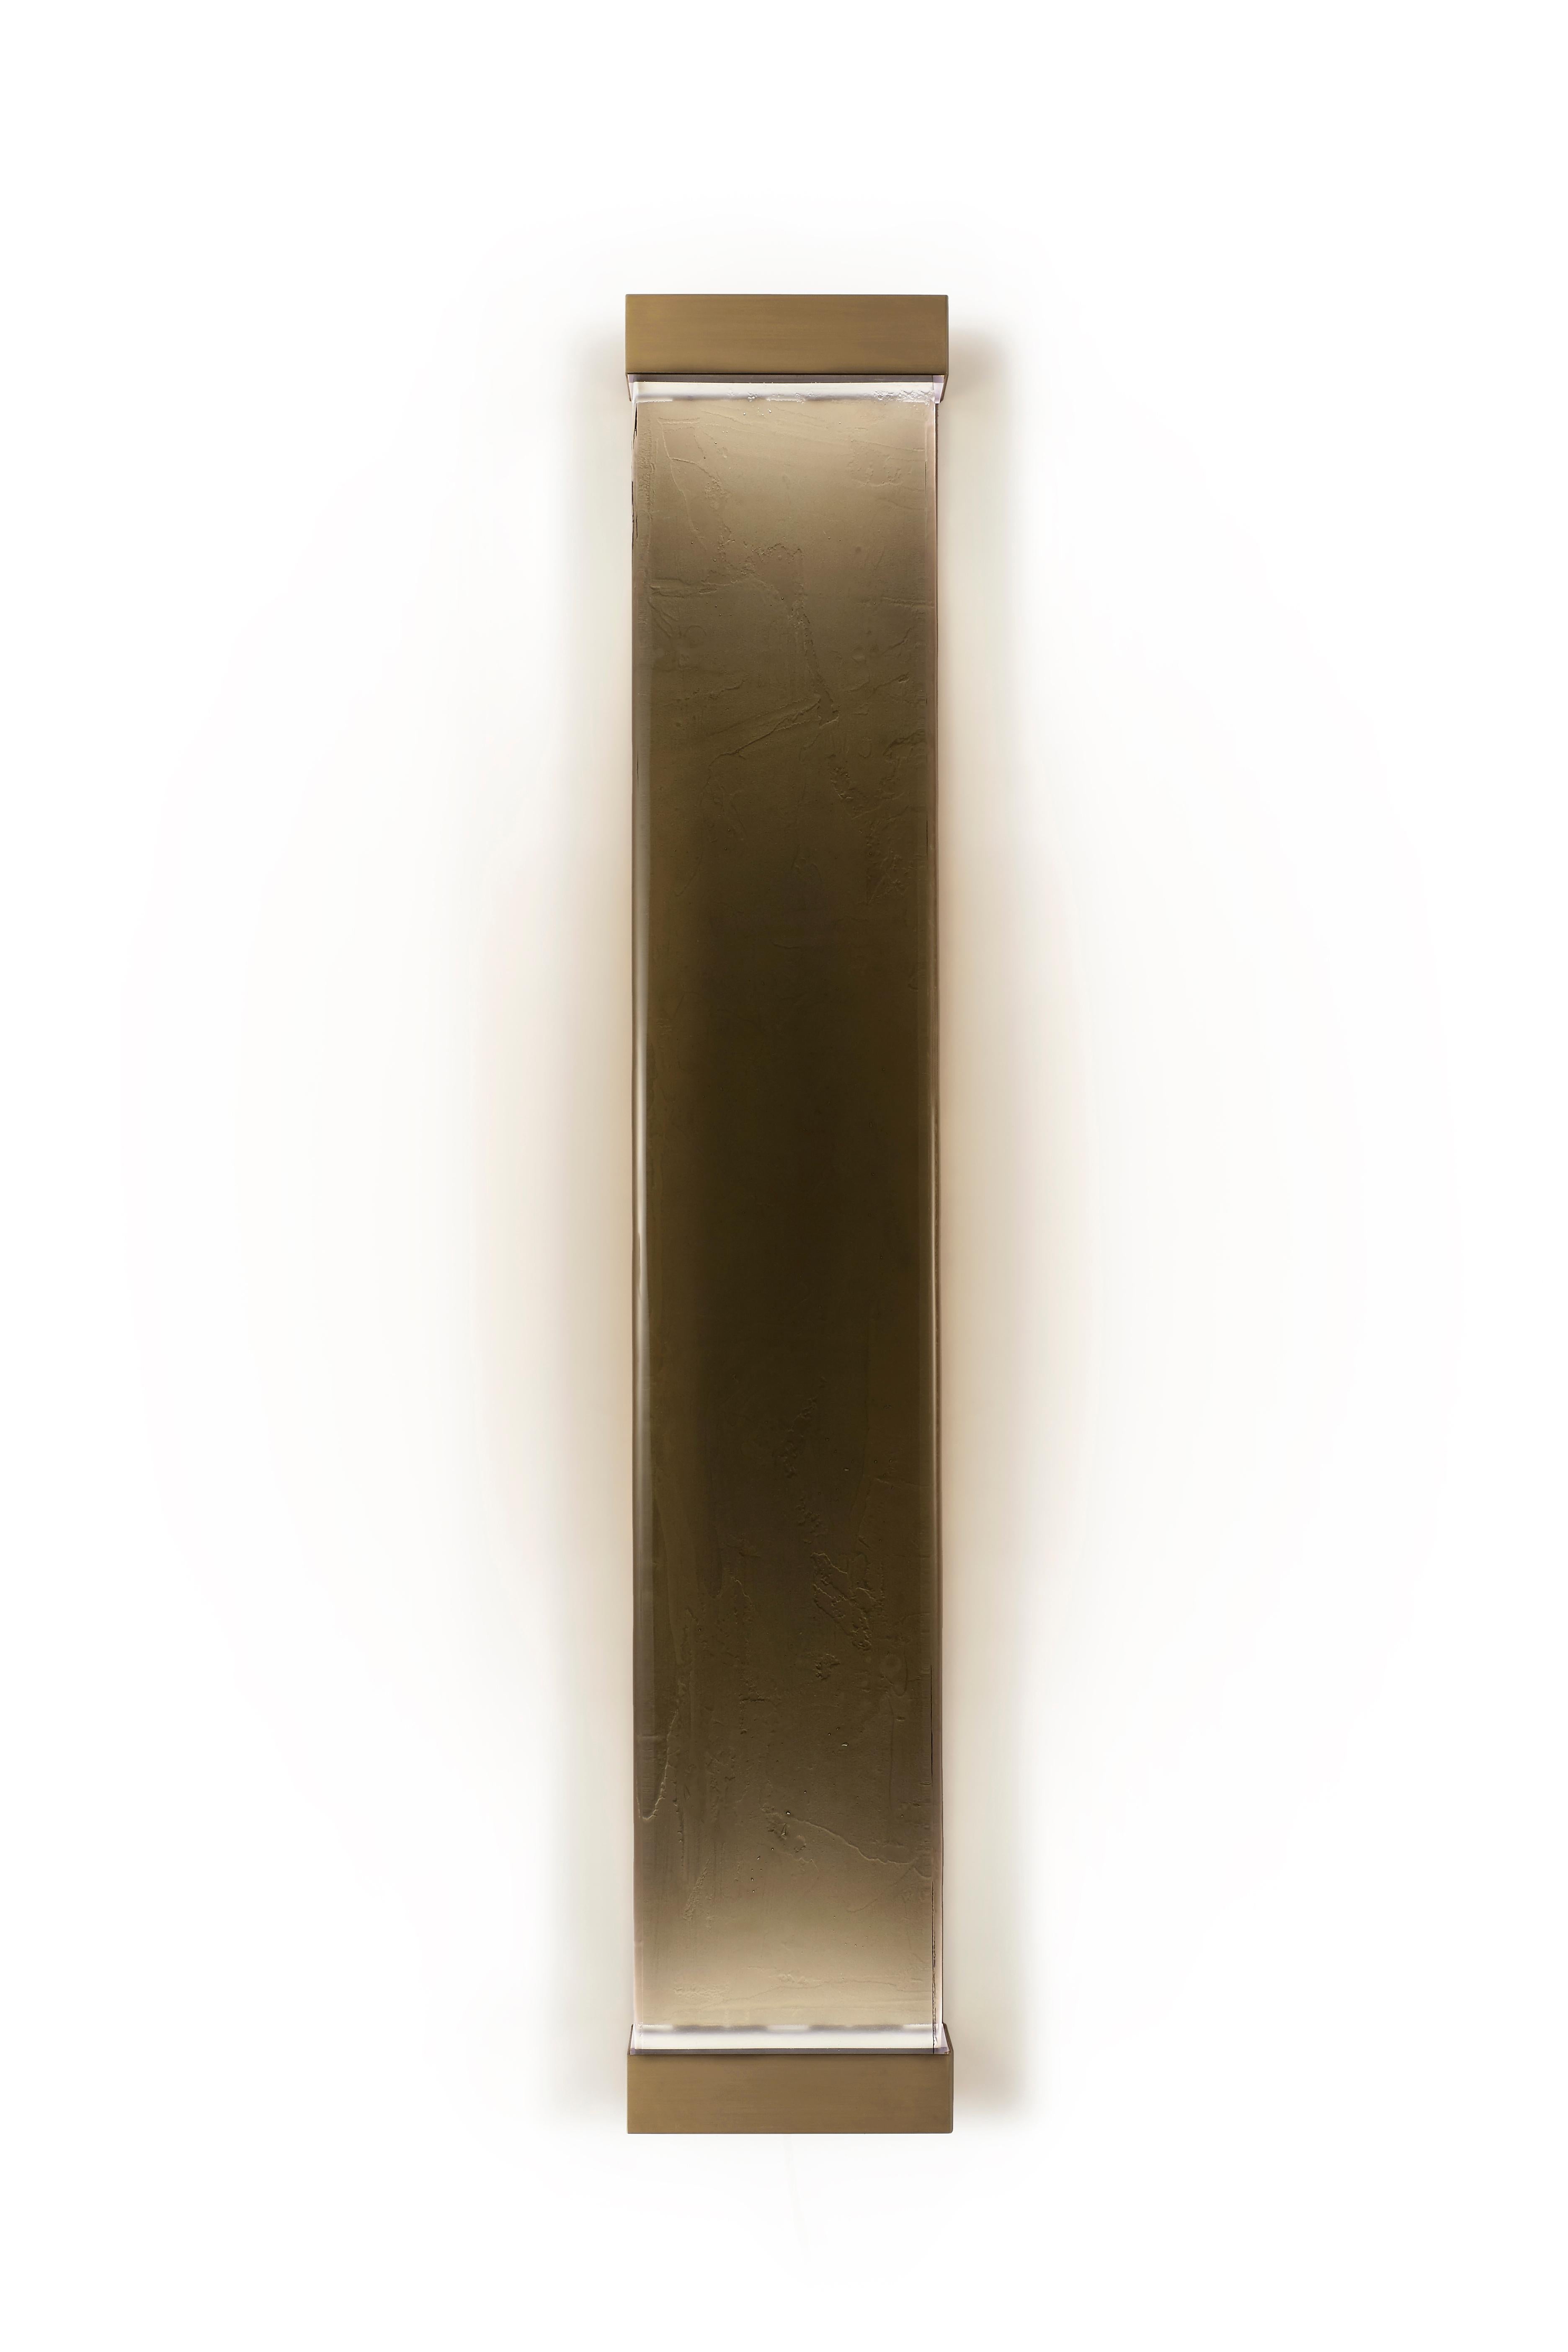 Jud Wall Lamps Polvere by Draga&Aurel Resin, 21st Century Glass Resin Brass